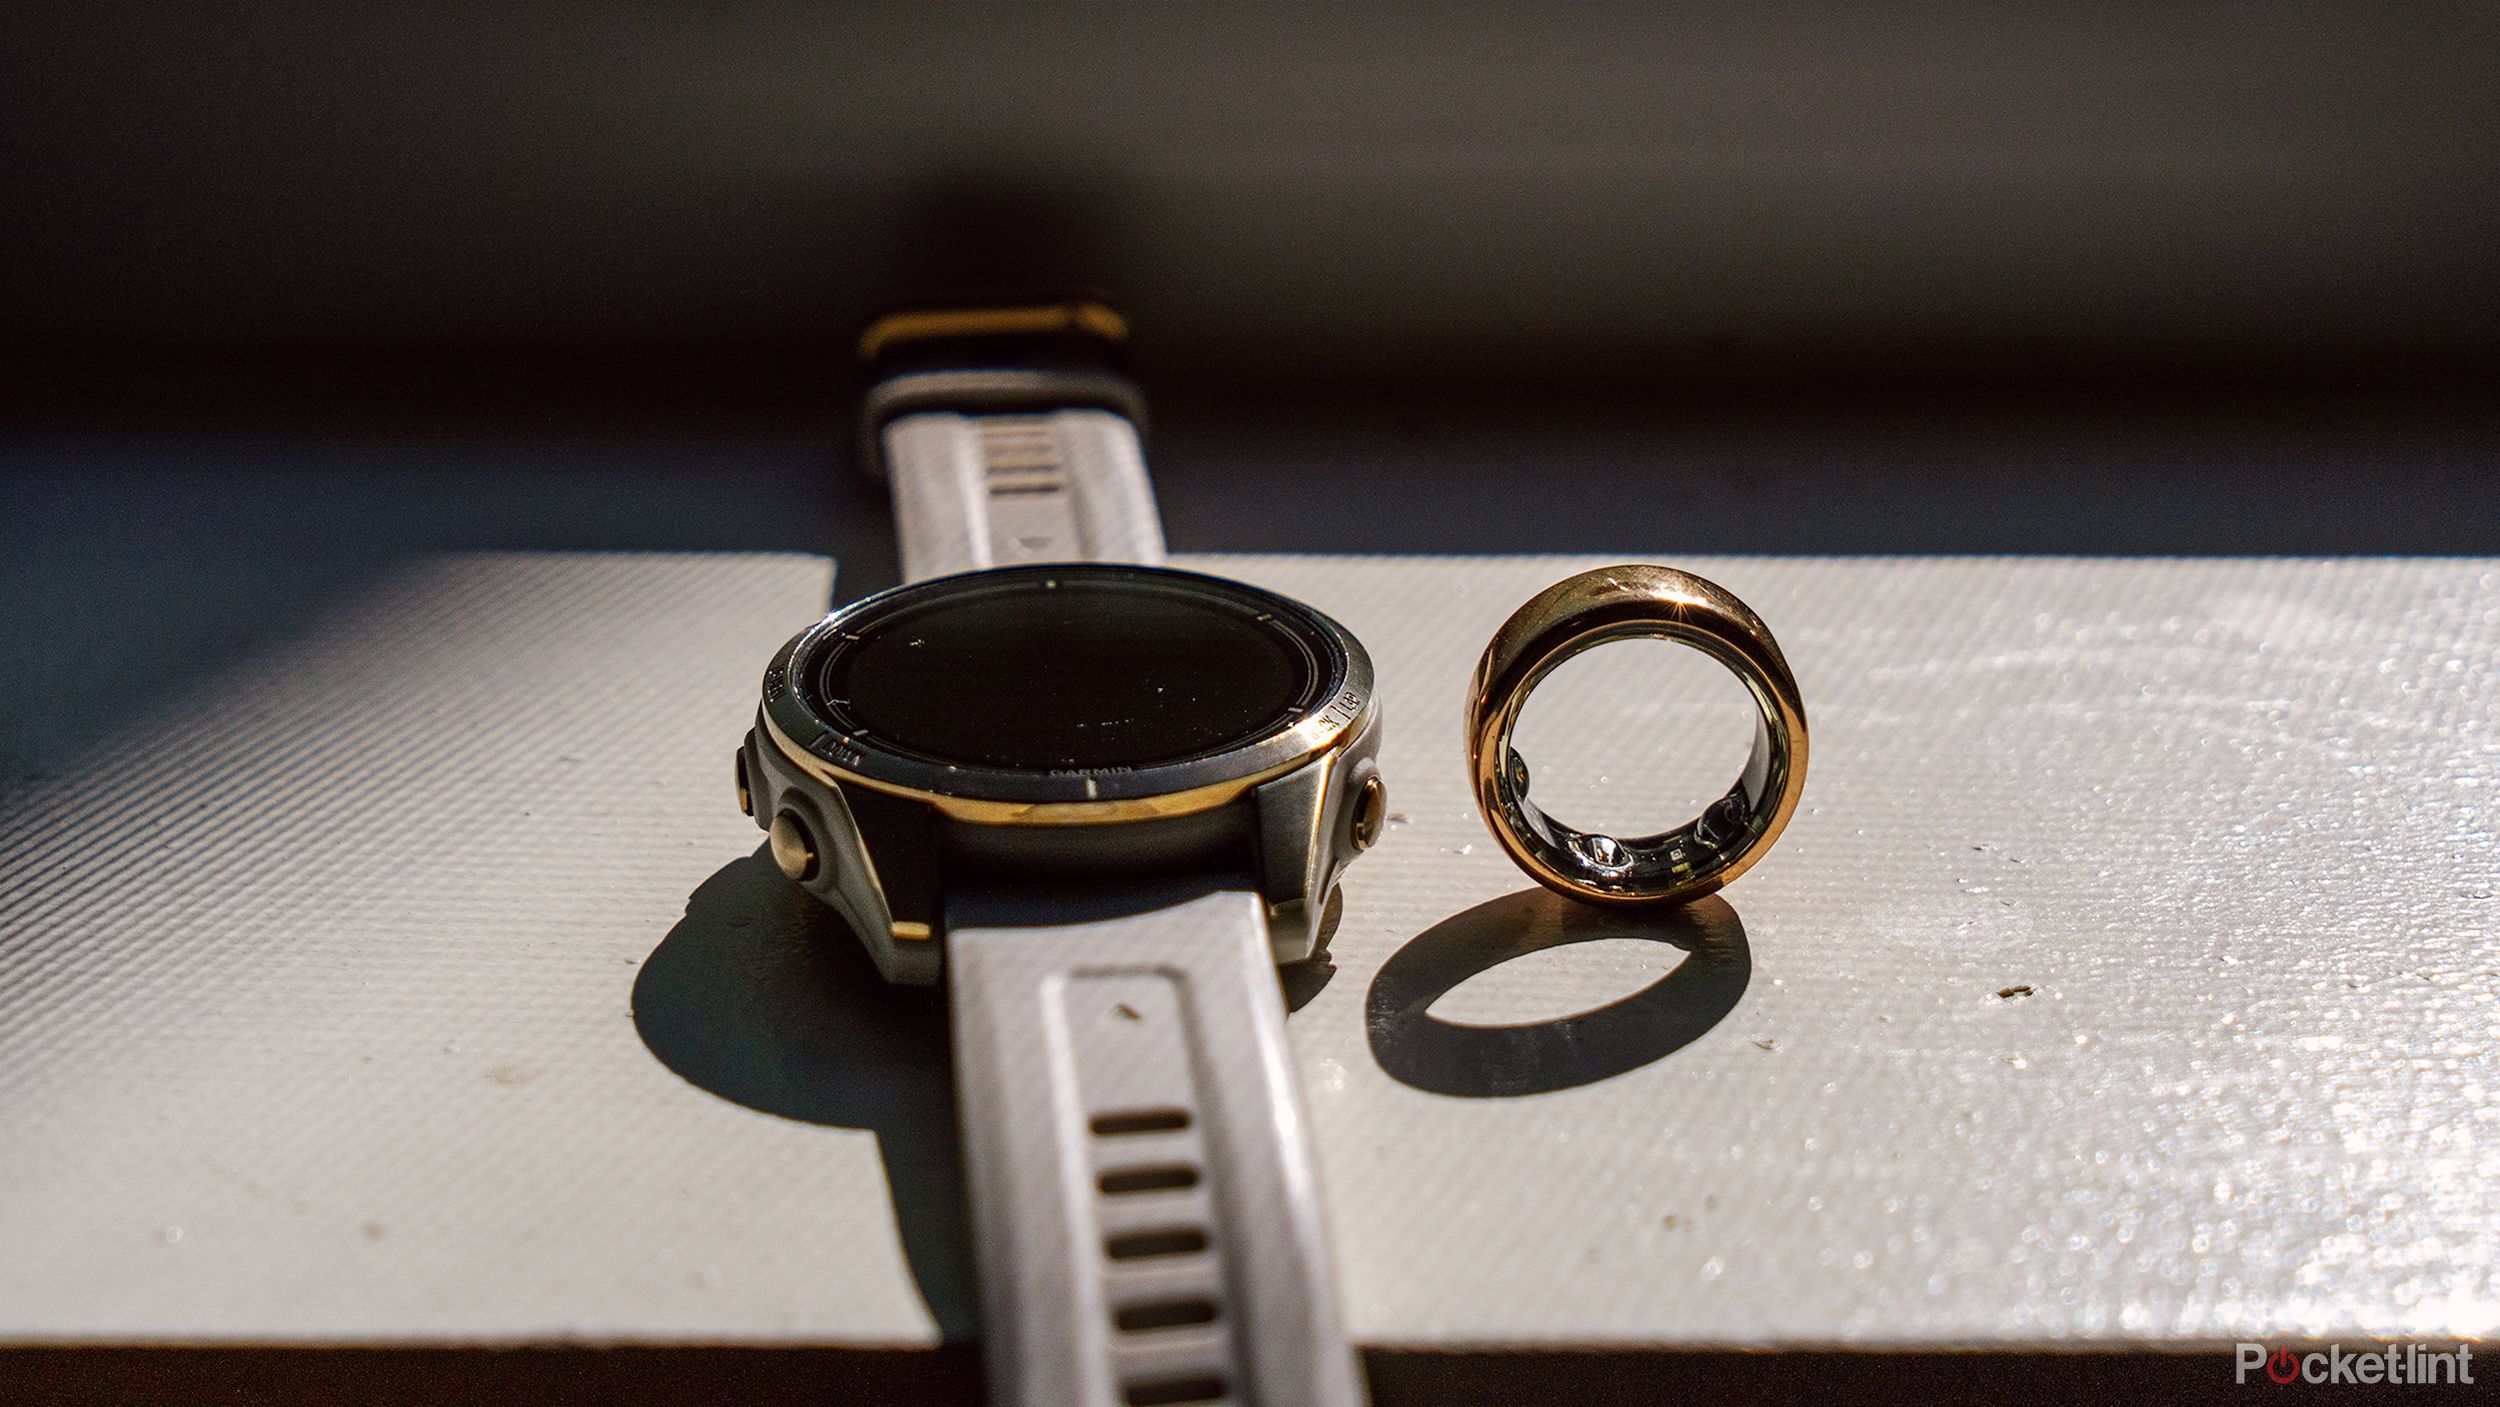 Why I’m sticking to a smartwatch over a smart ring